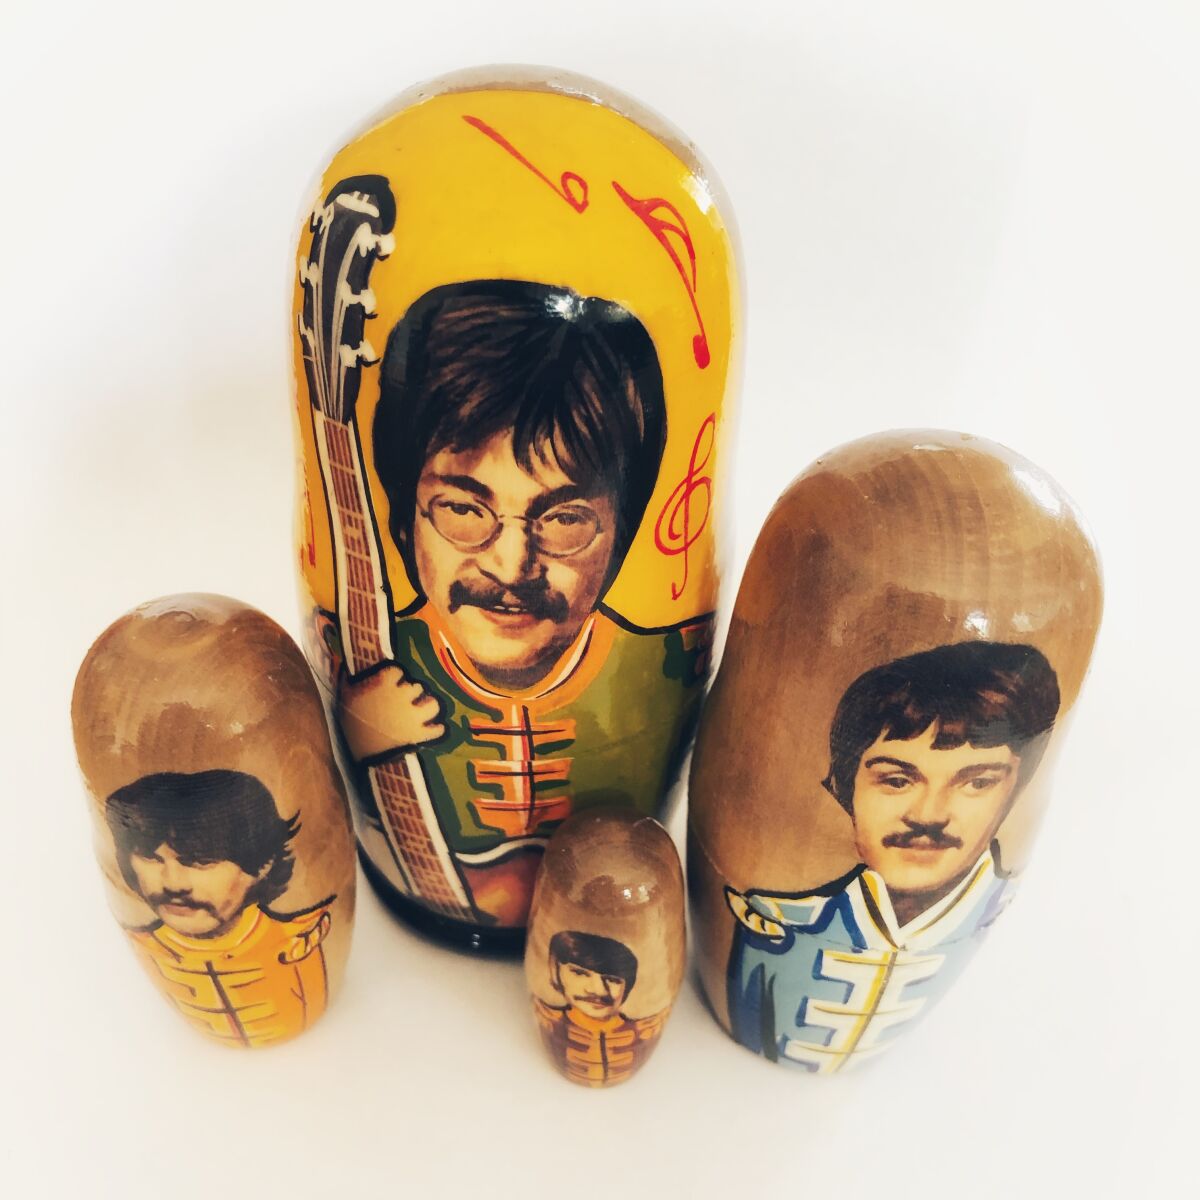 Beatles nesting dolls, not from England.